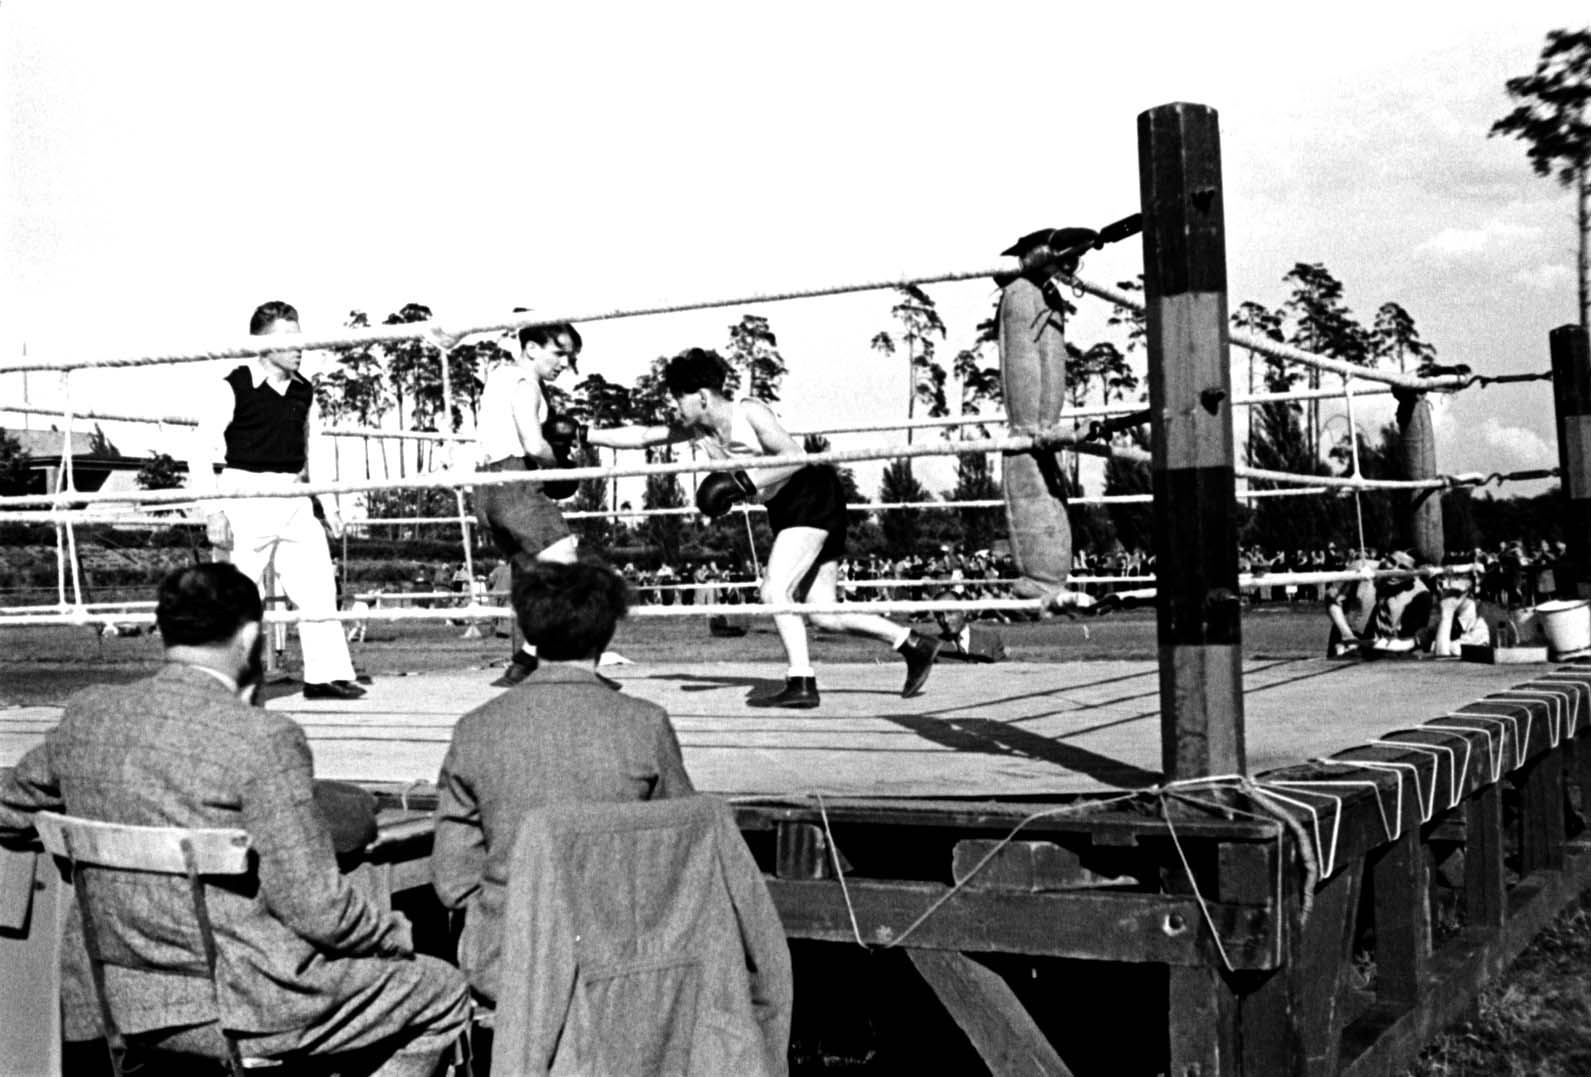 Berlin, Germany, 16/6/1935, Branntwein and Langmann, boxers at the Maccabi Berlin International Sports Day.